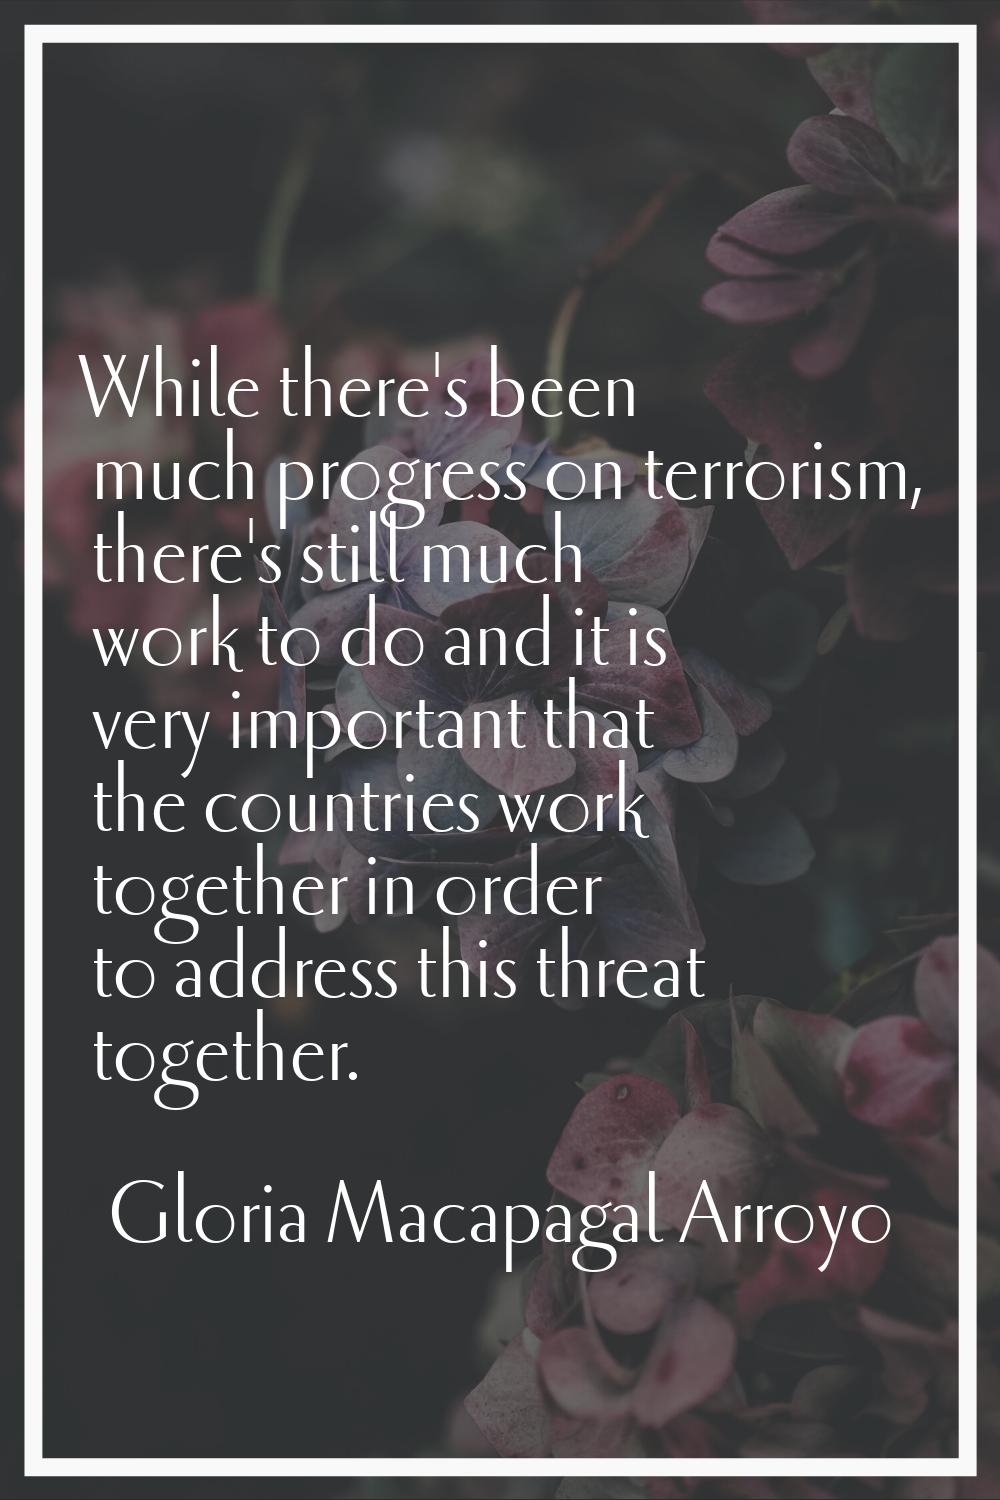 While there's been much progress on terrorism, there's still much work to do and it is very importa